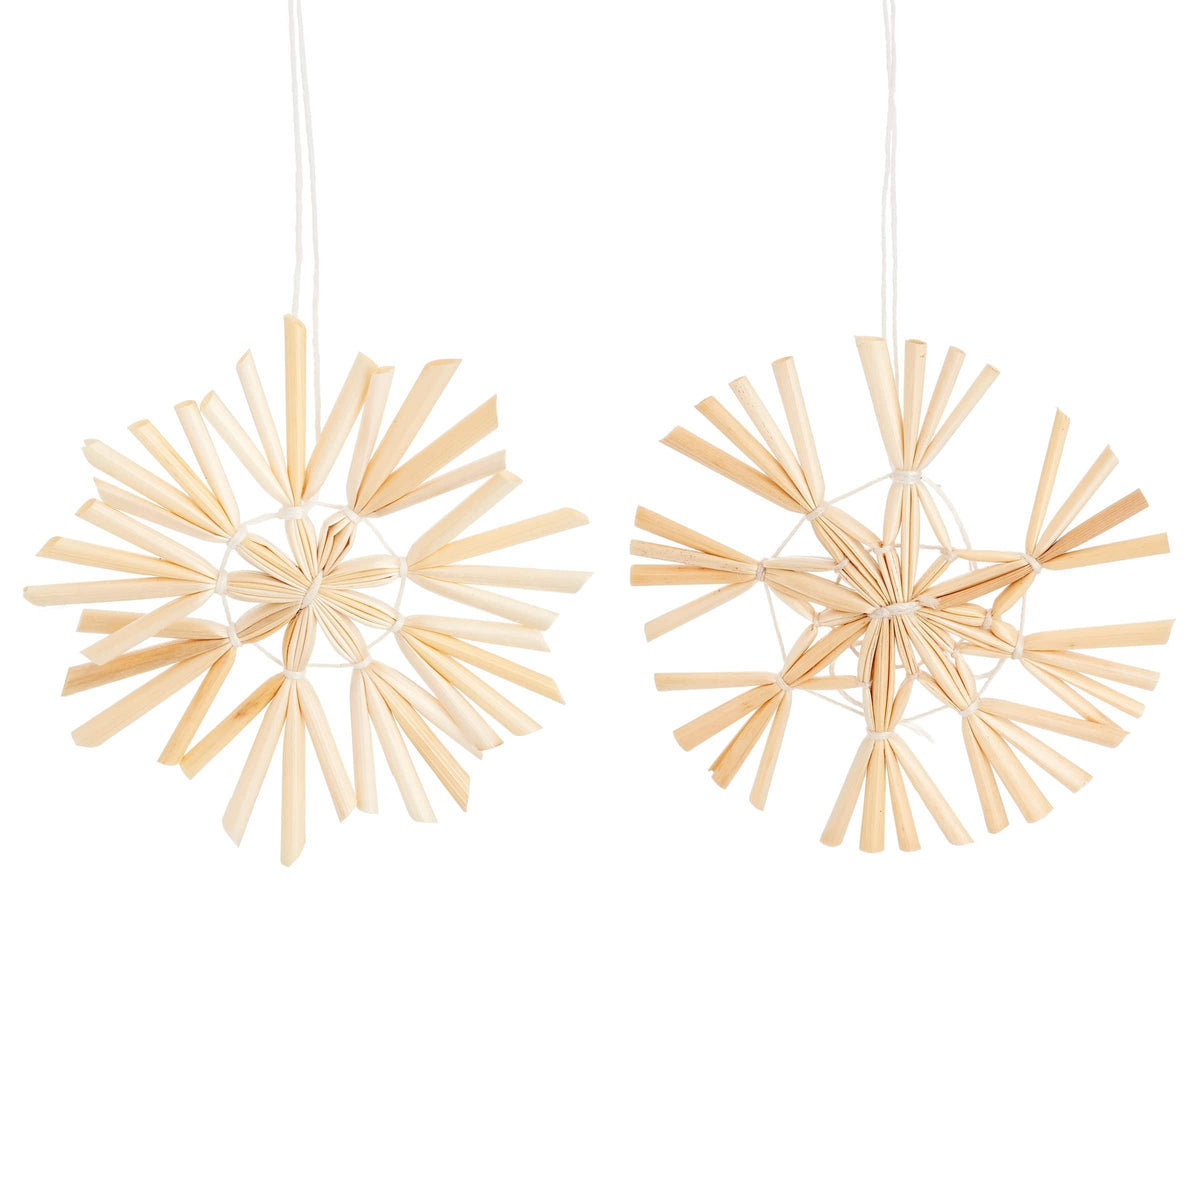 Sass & Belle Straw Snowflake Decorations - Set Of 4